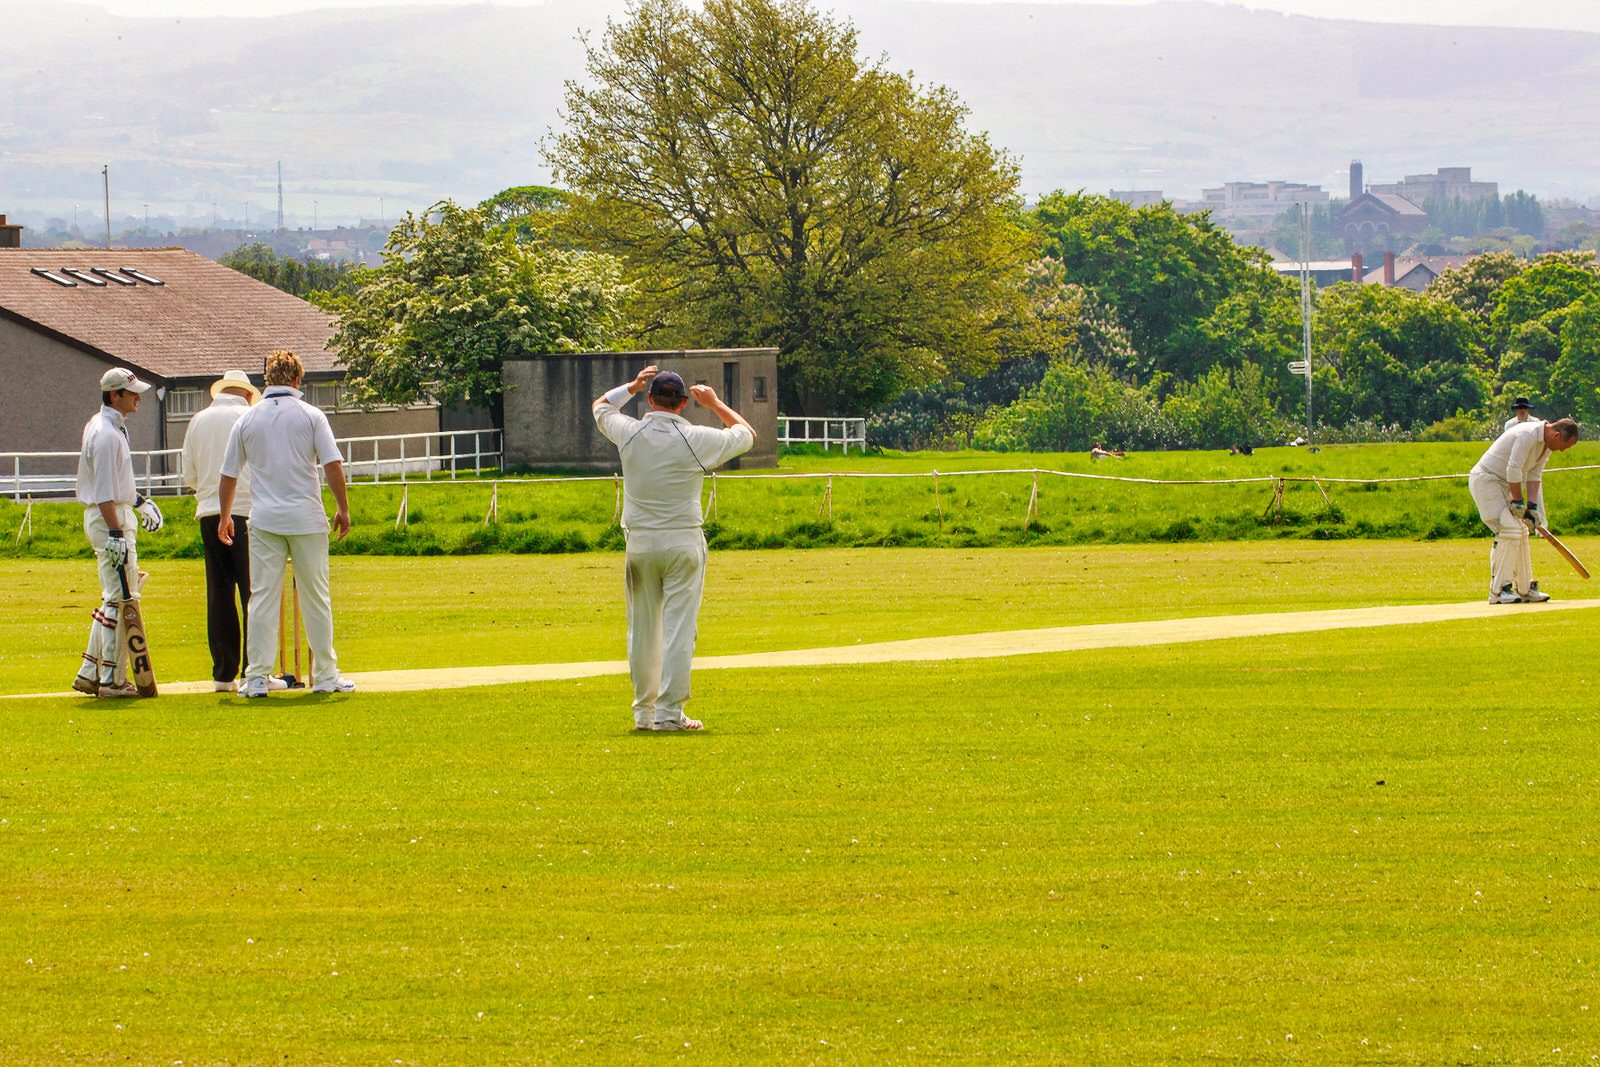 TWO CRICKET CLUBS IN PHOENIX PARK NEAR THE WELLINGTON MONUMENT 025